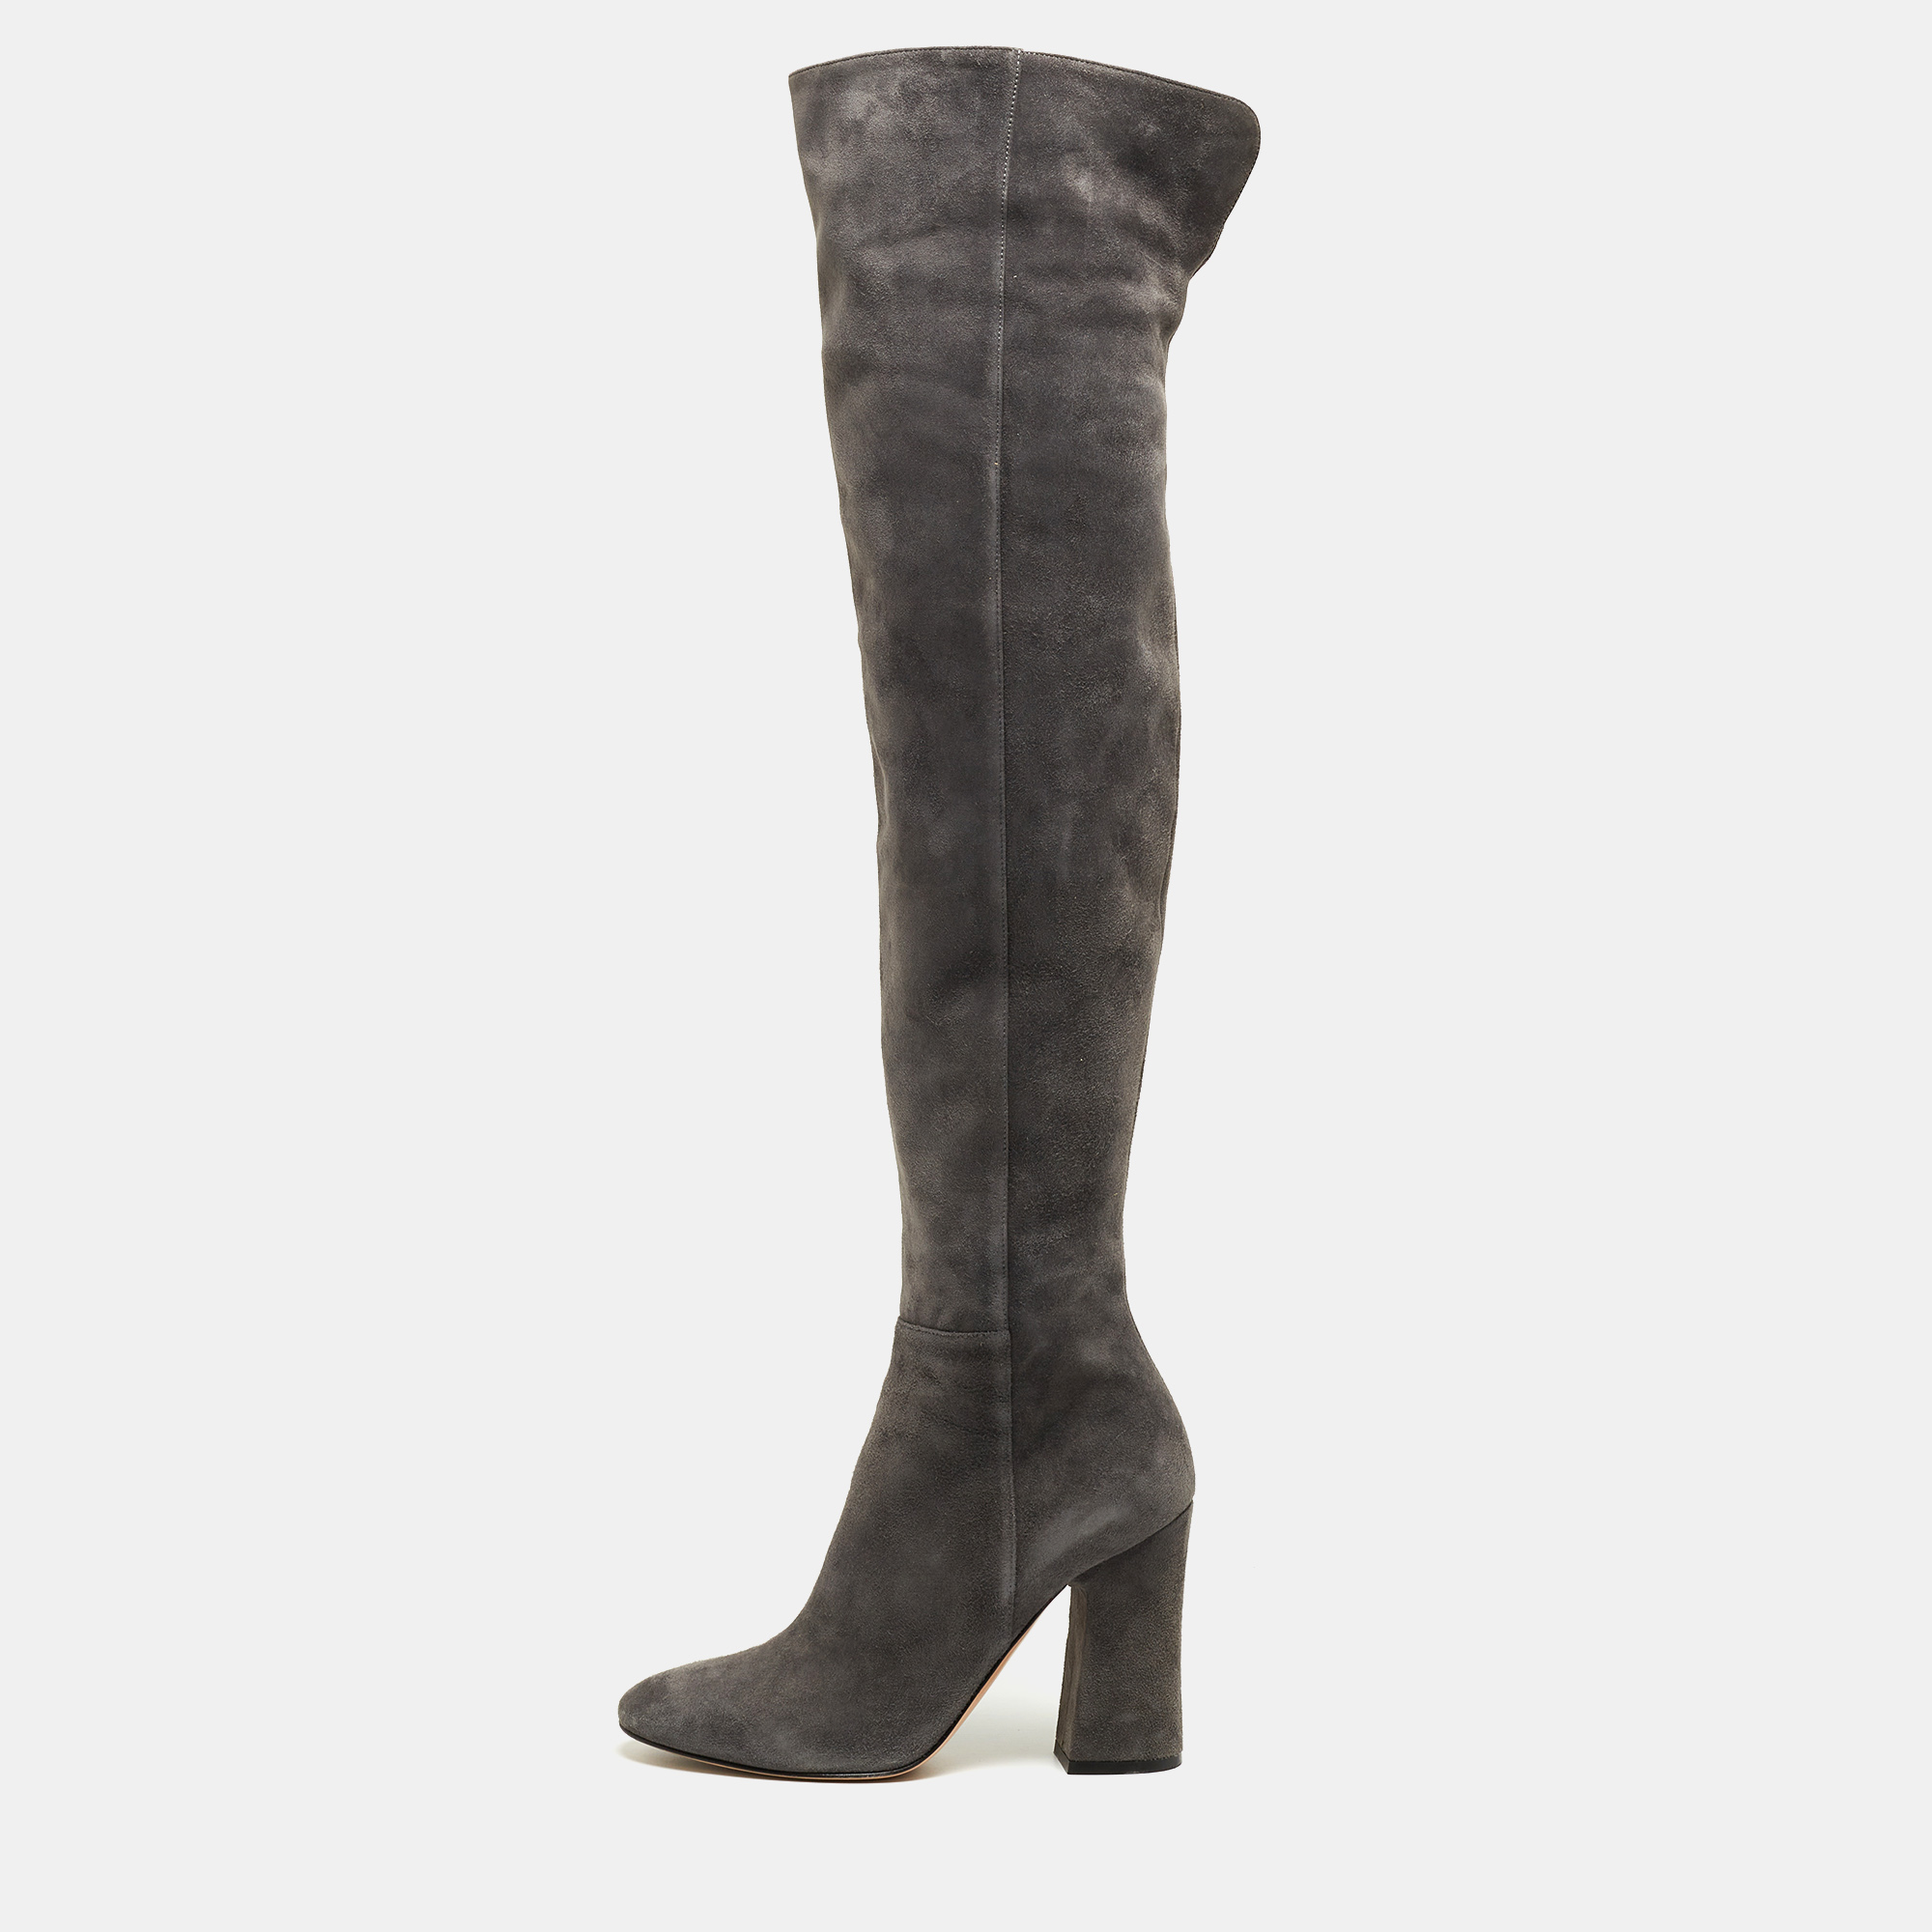 Pre-owned Gianvito Rossi Grey Suede Knee Boots Size 39